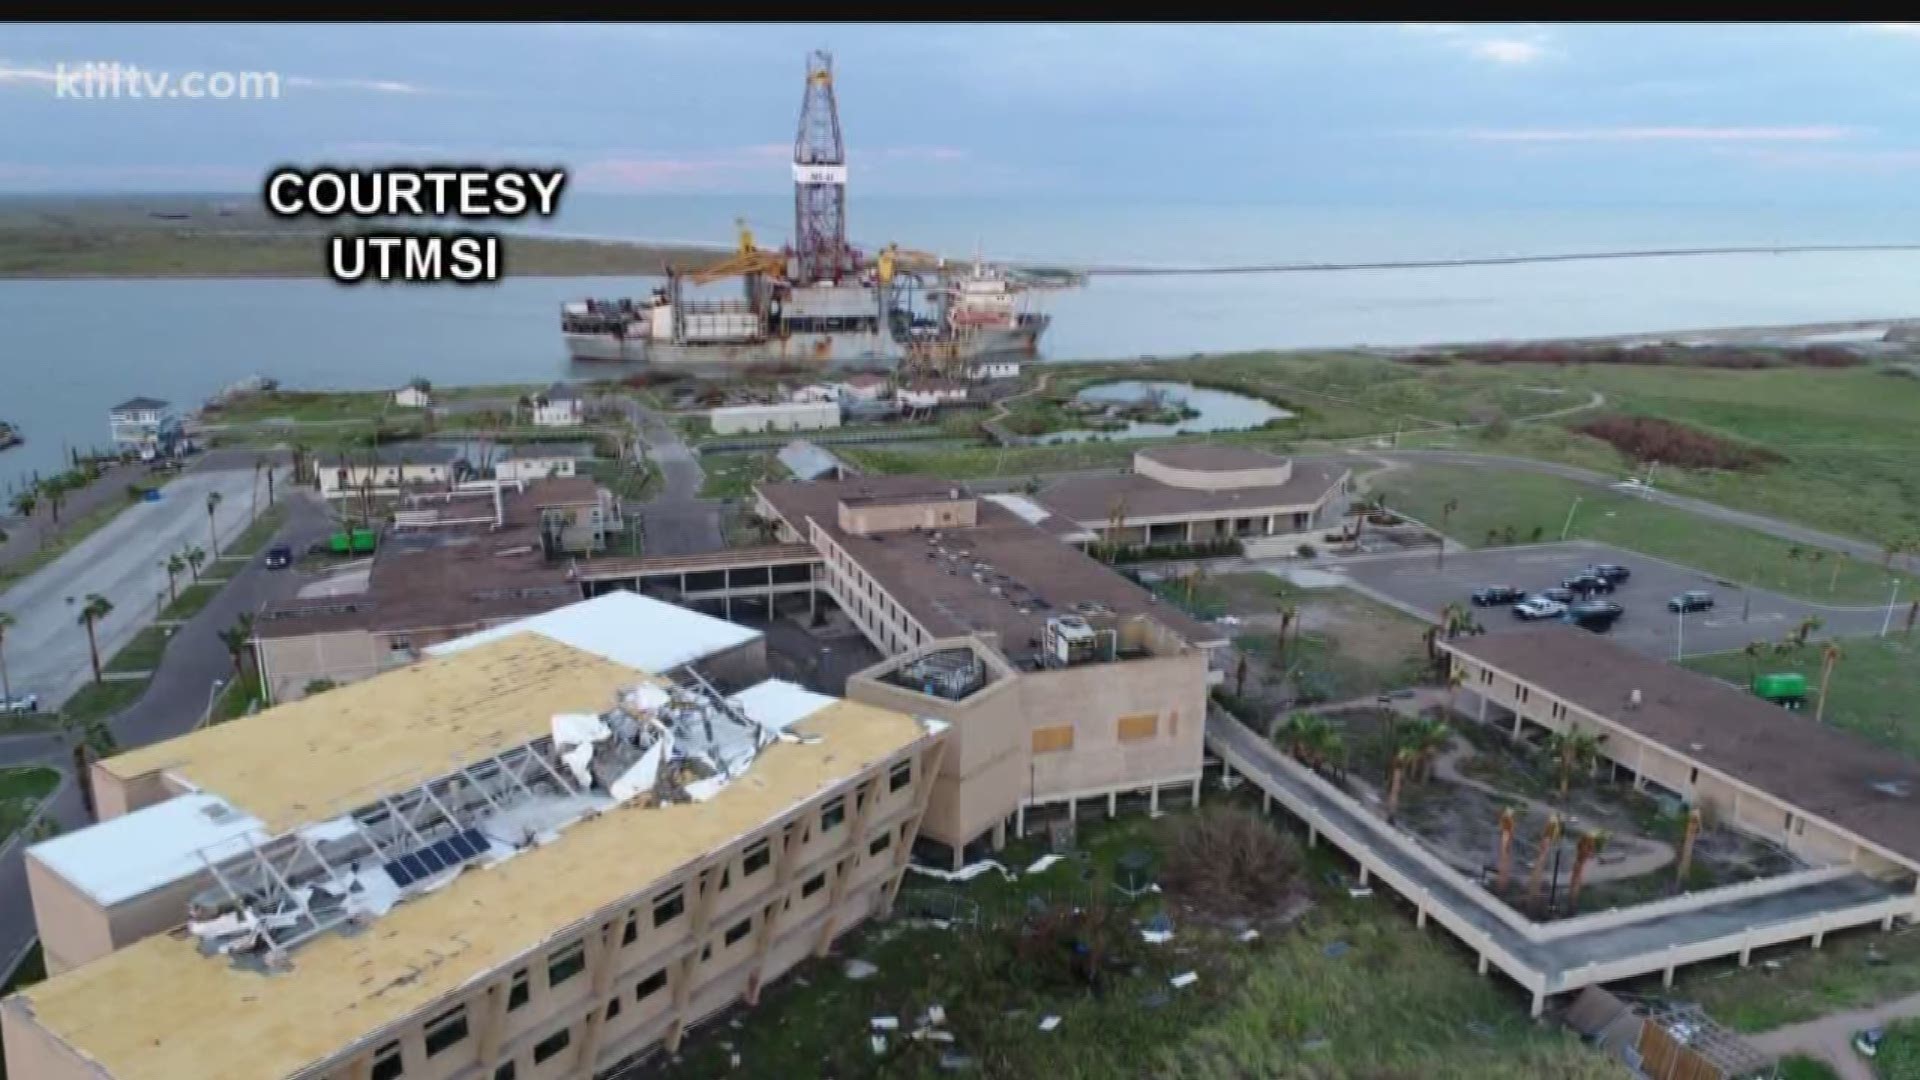 The University of Texas Marine Science Institute in Port Aransas was battered by Hurricane Harvey's strong winds causing severe damage to several buildings at the research site.